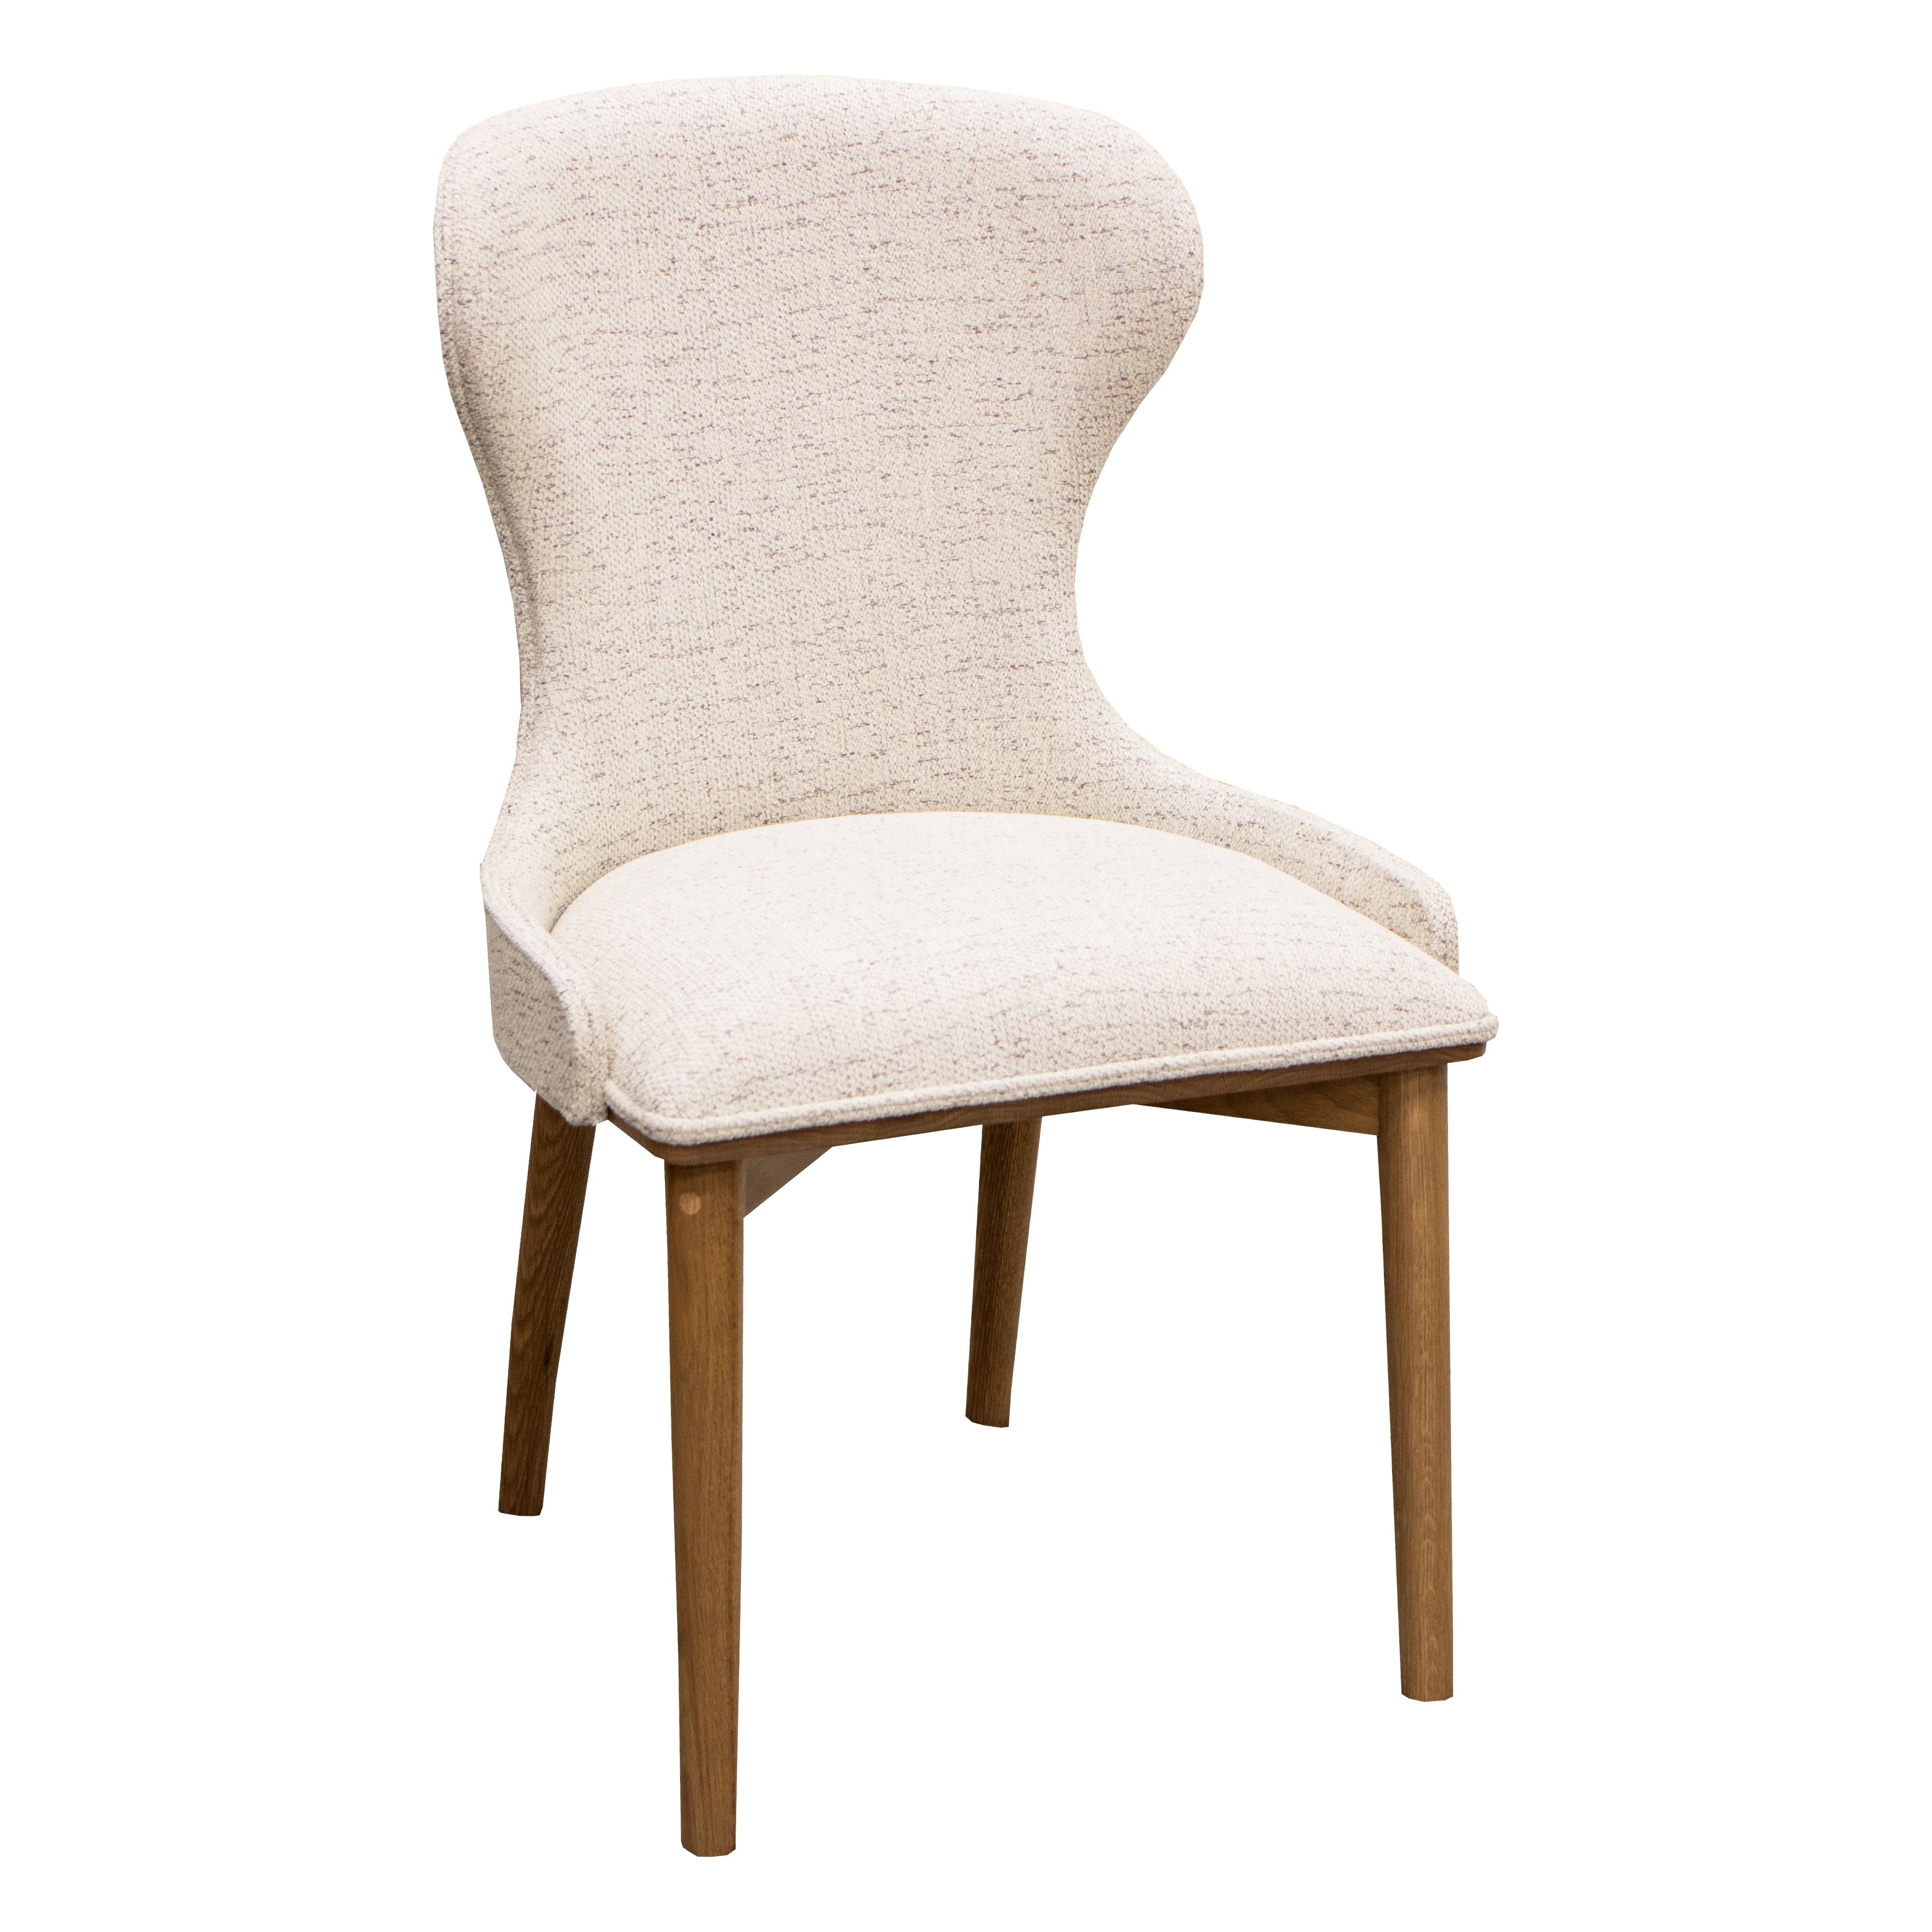 Sedona Upholstered Dining Chair